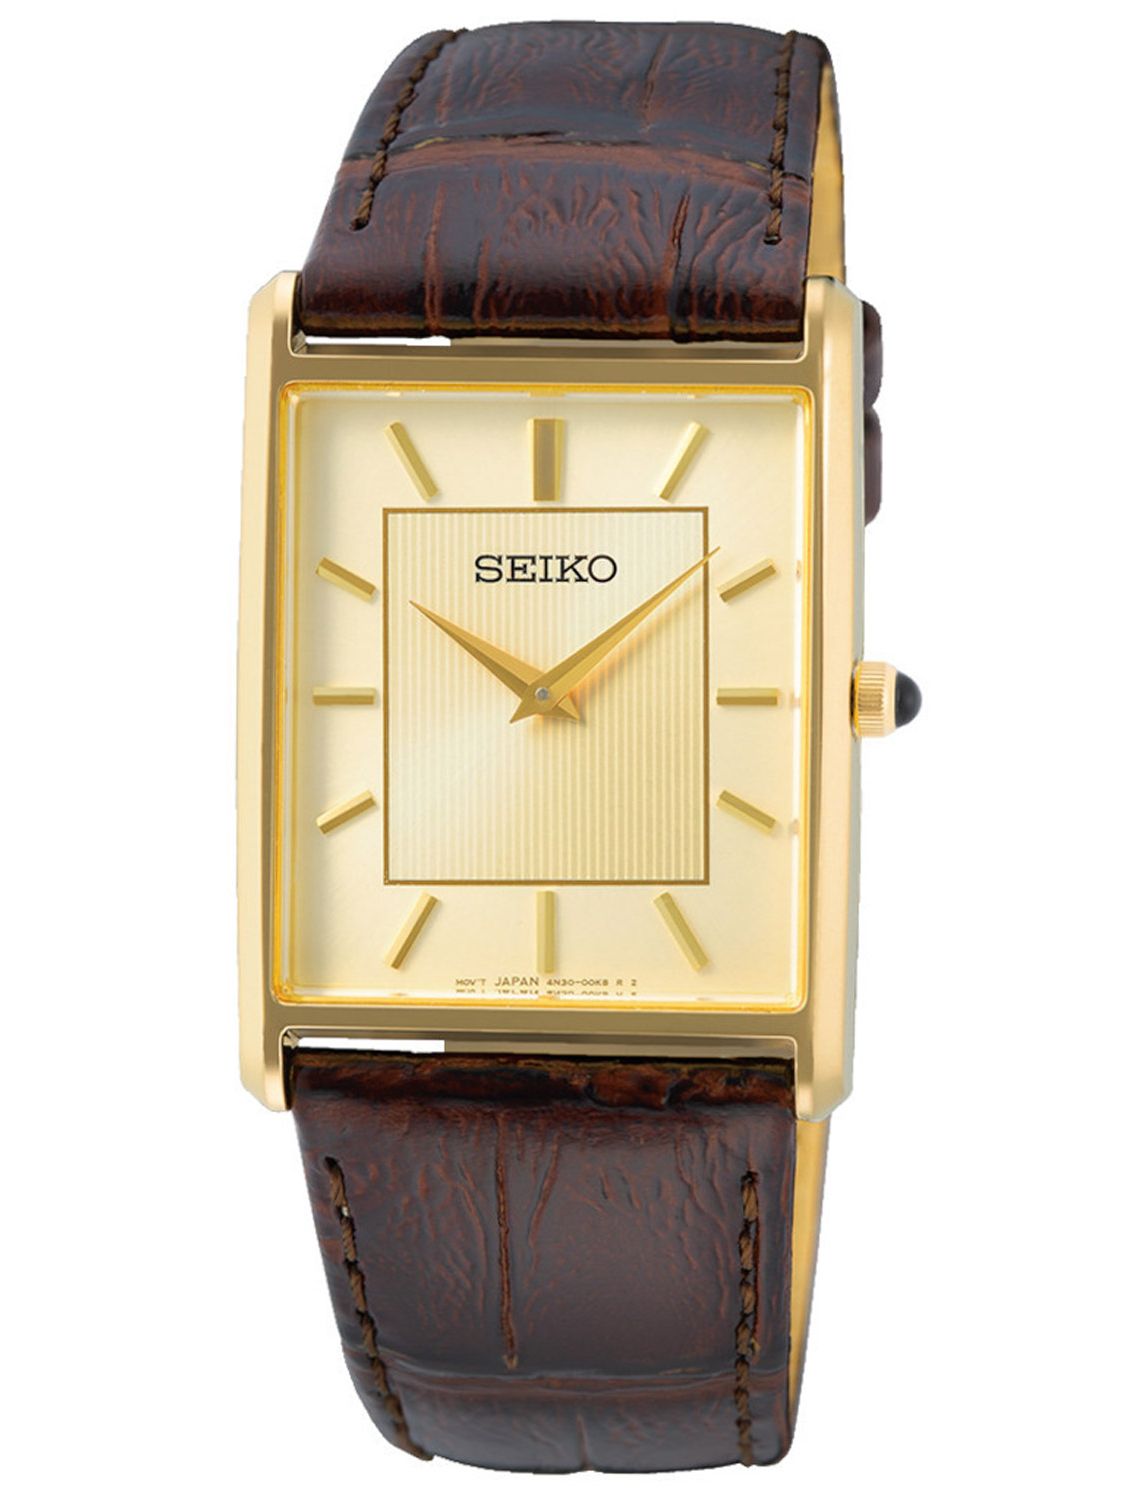 Seiko SWR064P1 Men's Watch with Leather Strap Brown/Gold Tone